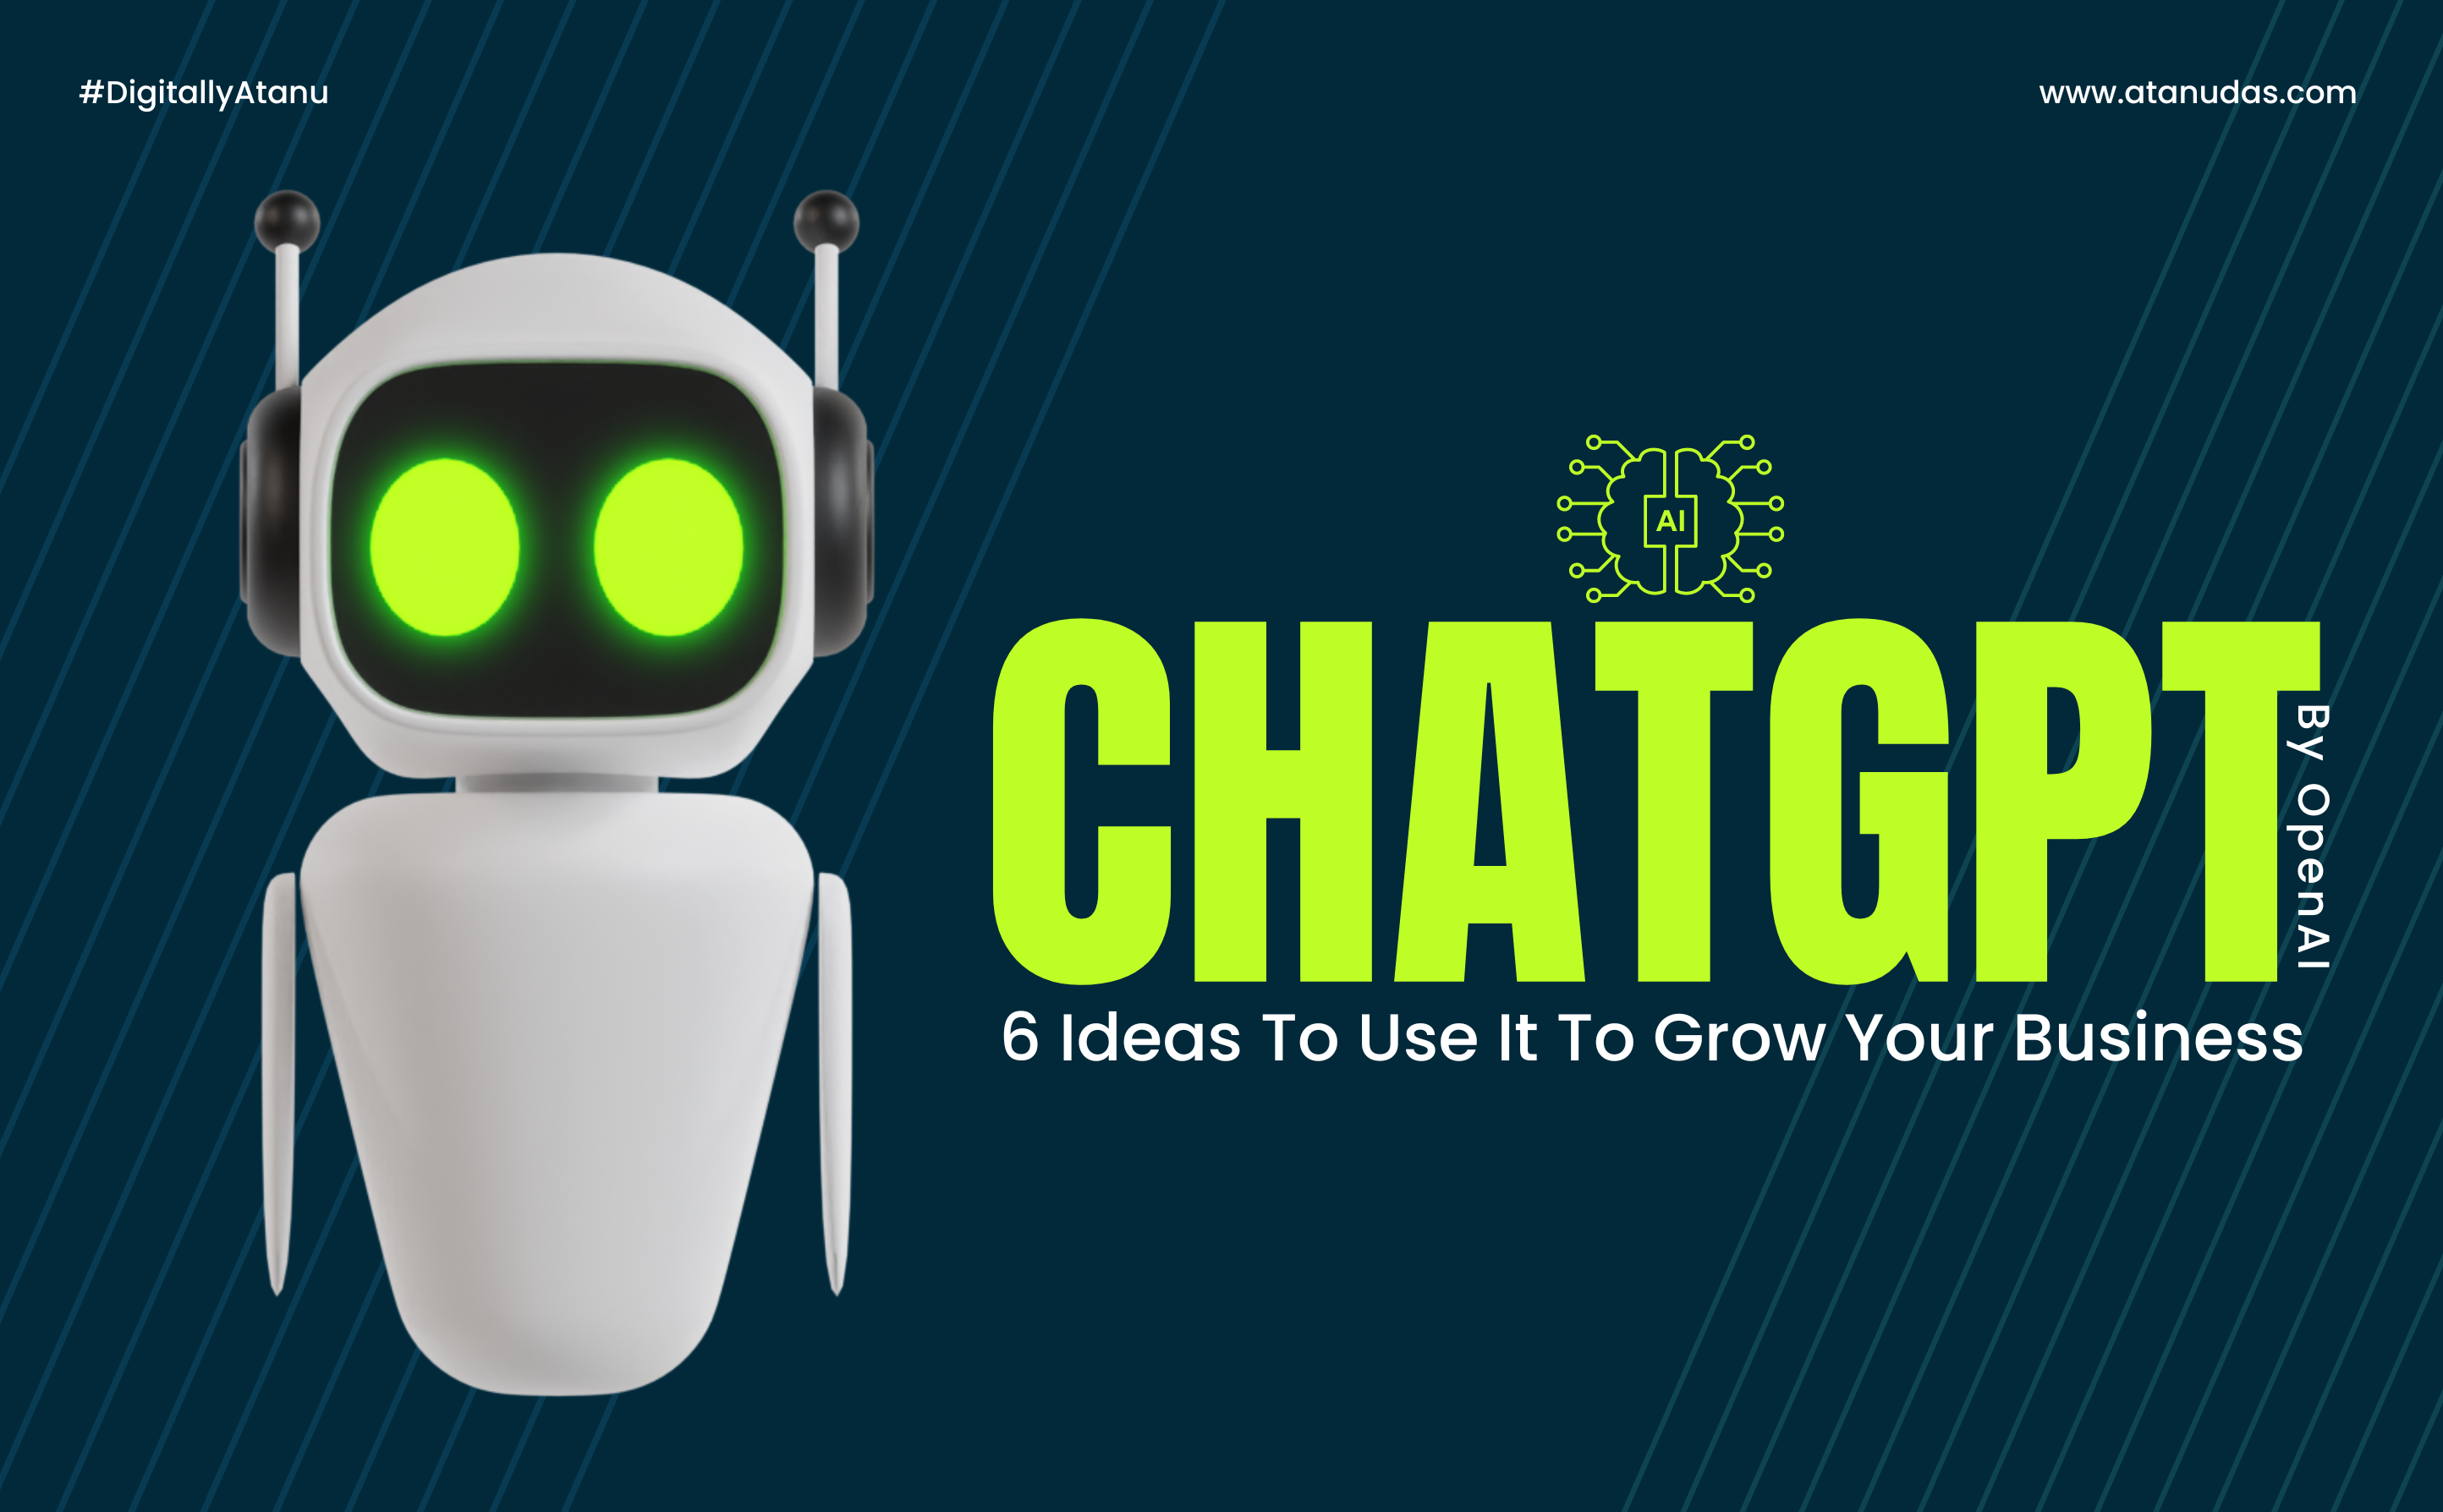 Top 6 Ideas To Use ChatGPT To Grow Your Business - Digitally Atanu